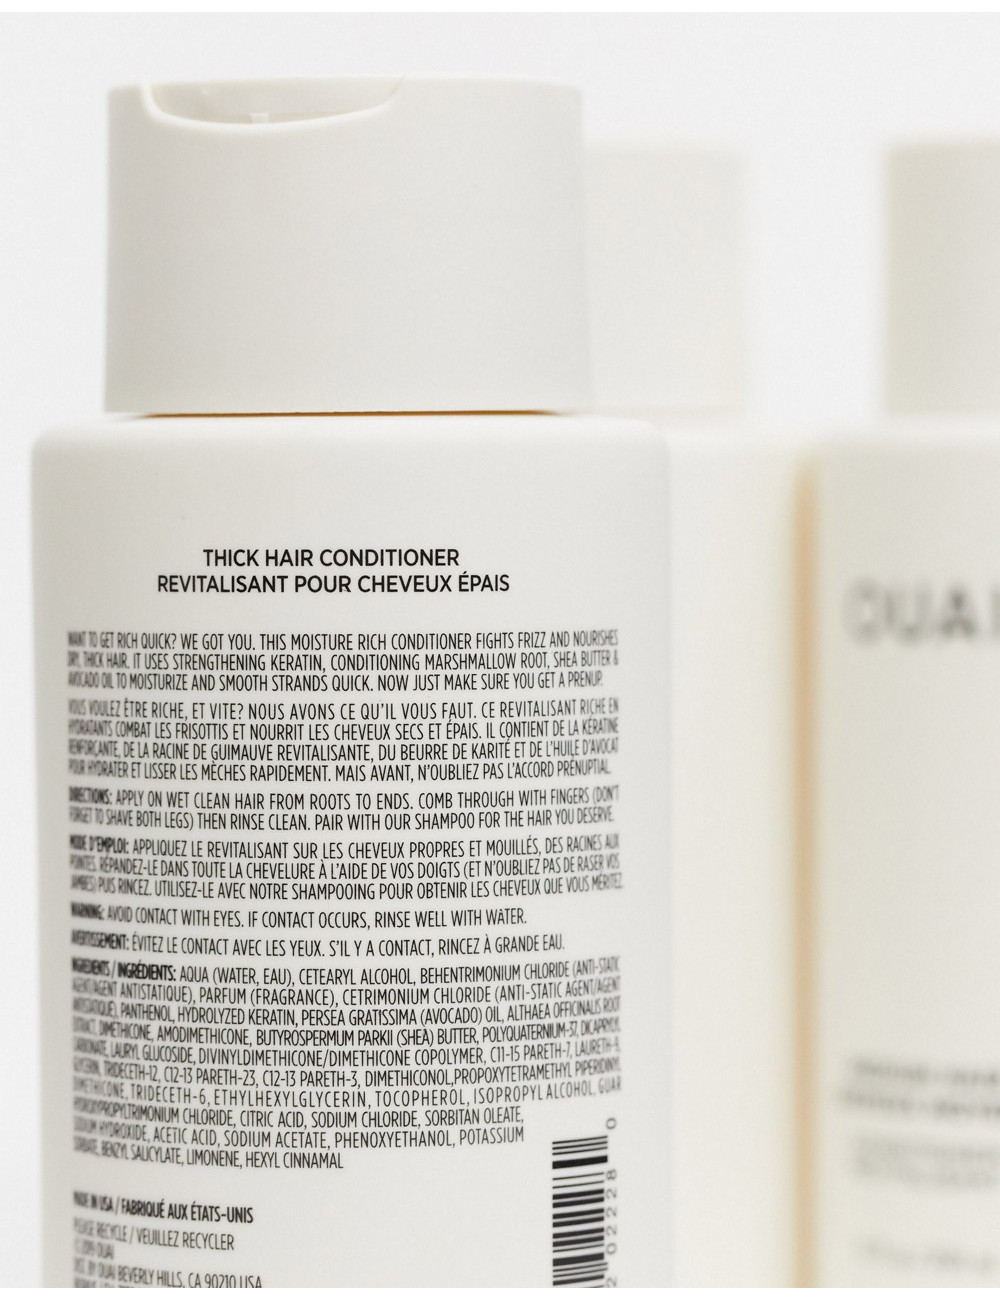 Ouai Thick Hair Conditioner...